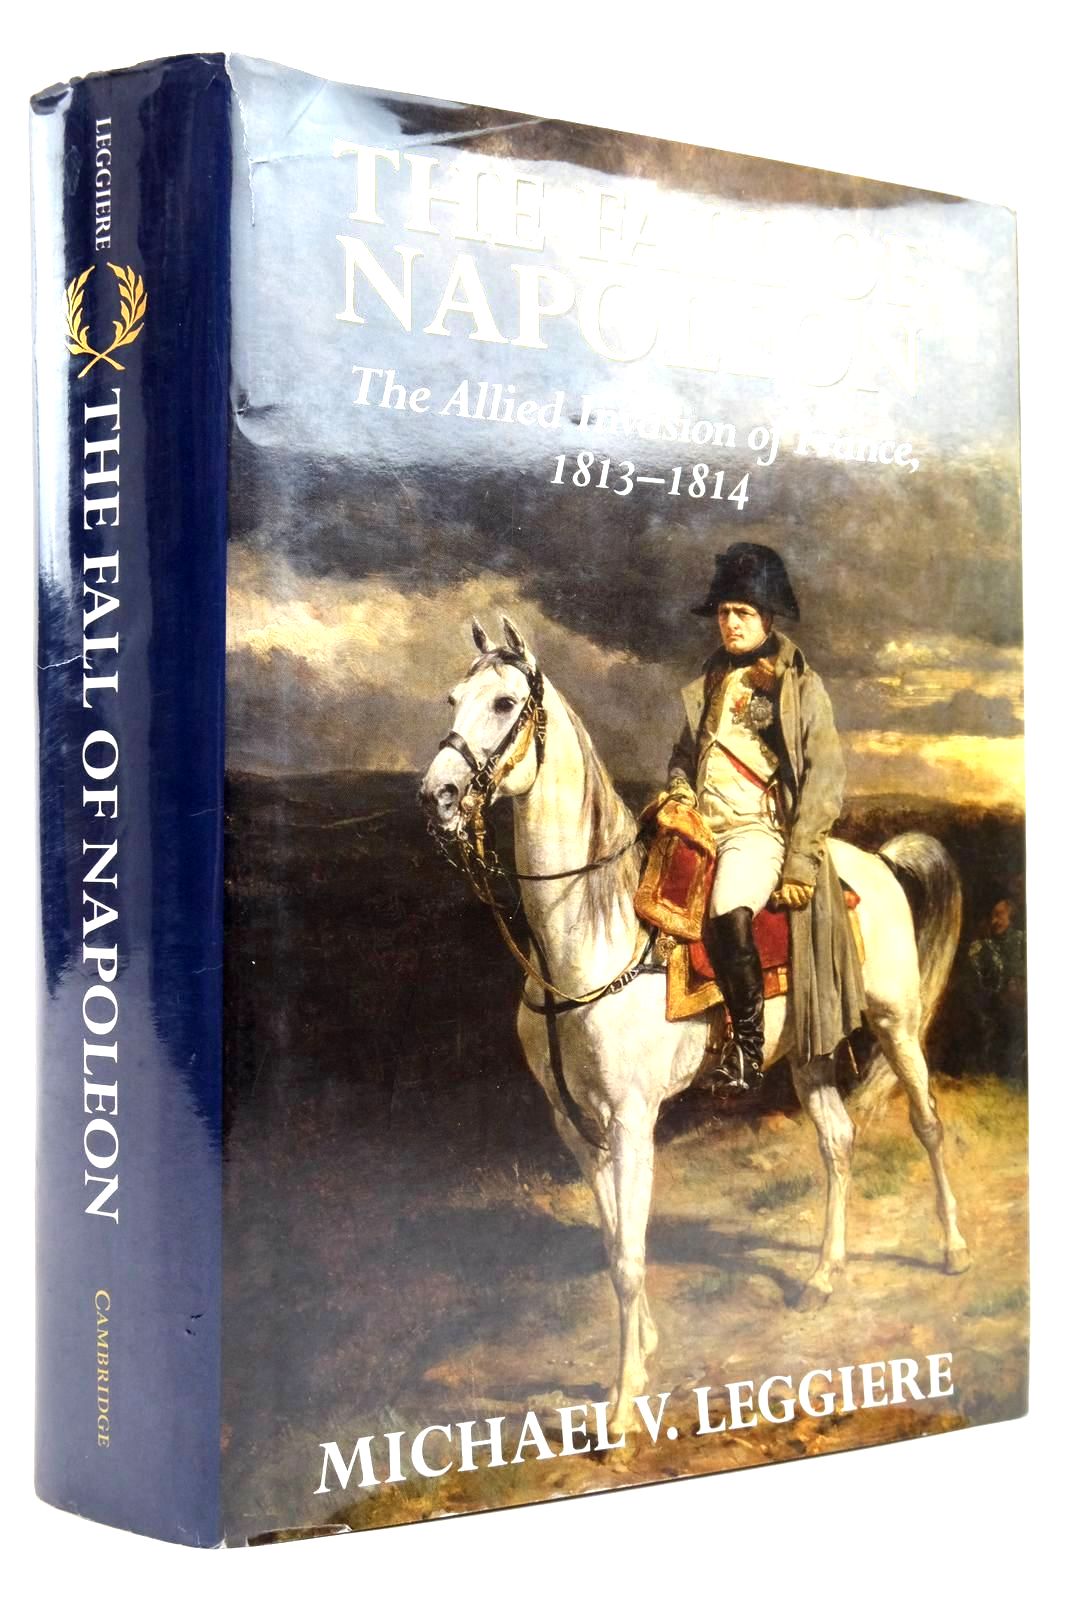 Photo of THE FALL OF NAPOLEON VOLUME I: THE ALLIED INVASION OF FRANCE, 1813-1814- Stock Number: 2135514